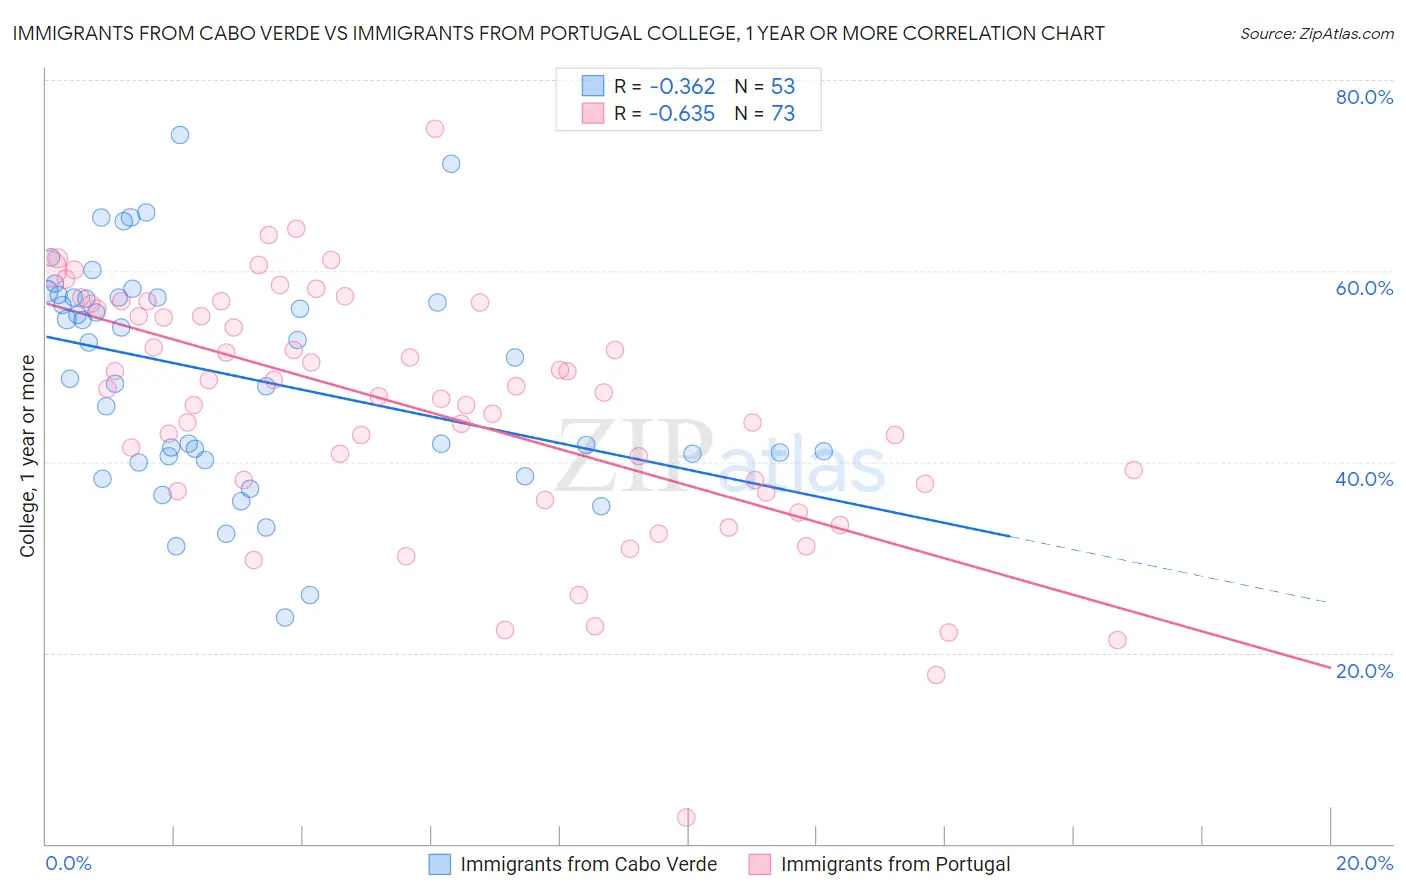 Immigrants from Cabo Verde vs Immigrants from Portugal College, 1 year or more